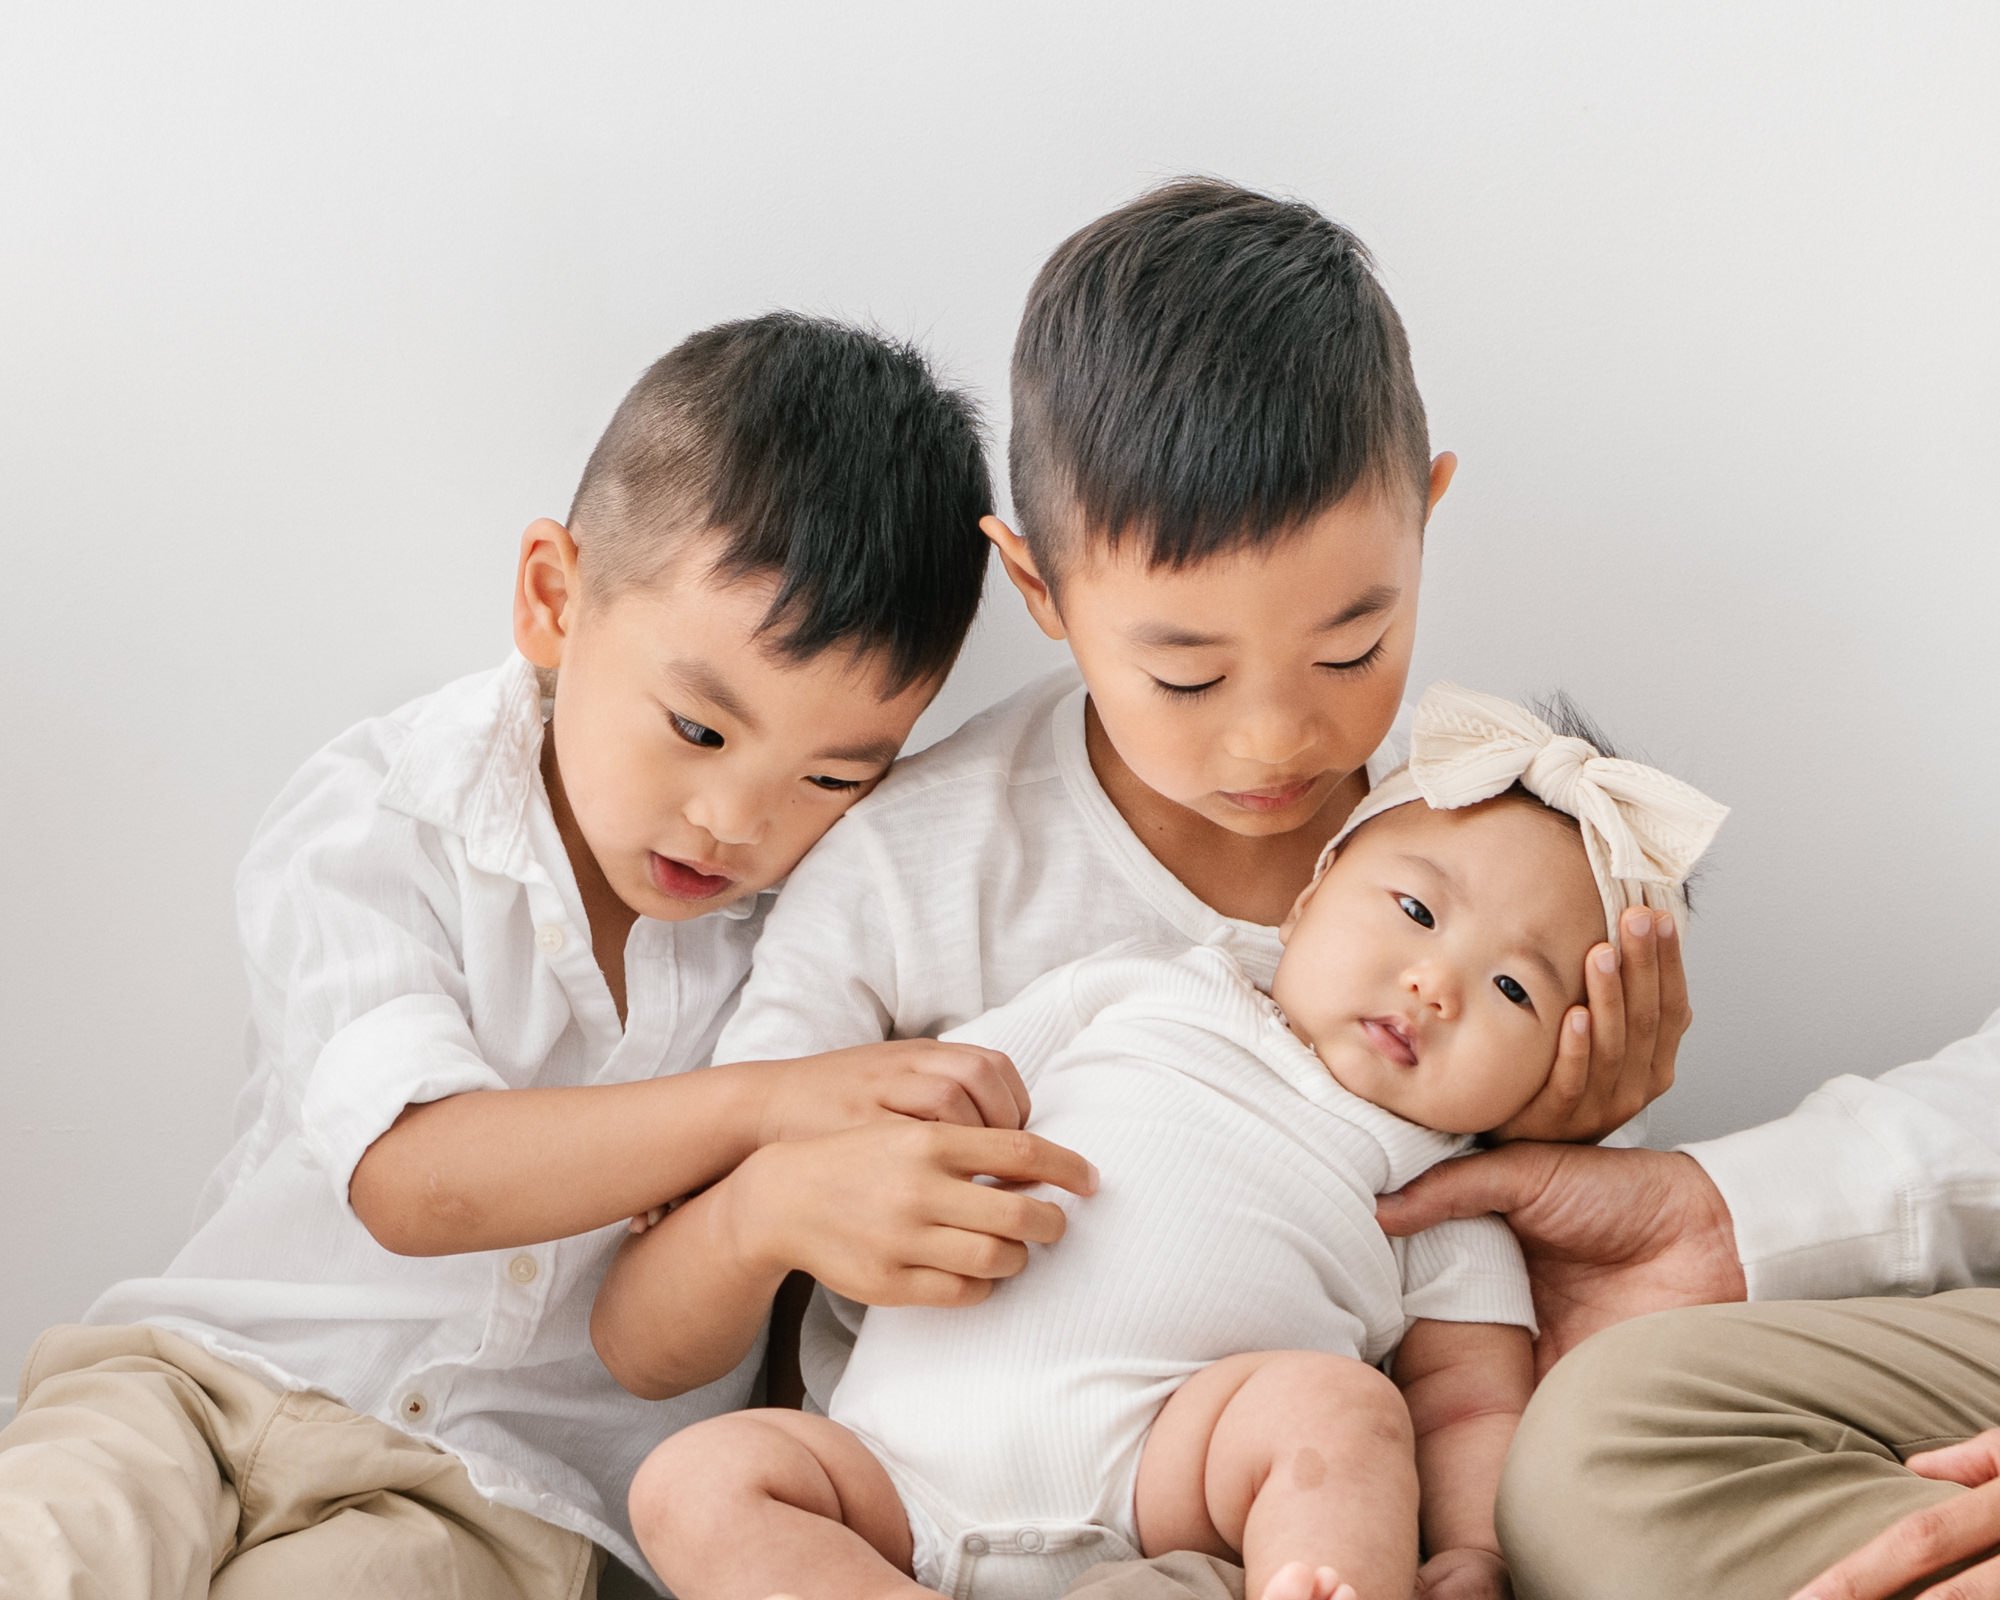    Siblings sit on the ground close together to admire newborn baby sister. Brothers hold hands and love on baby sister. Newborn baby looks at camera while family holds her. #studionewborns #studioportraits #babystudioportraits #NewJerseyPhotographer